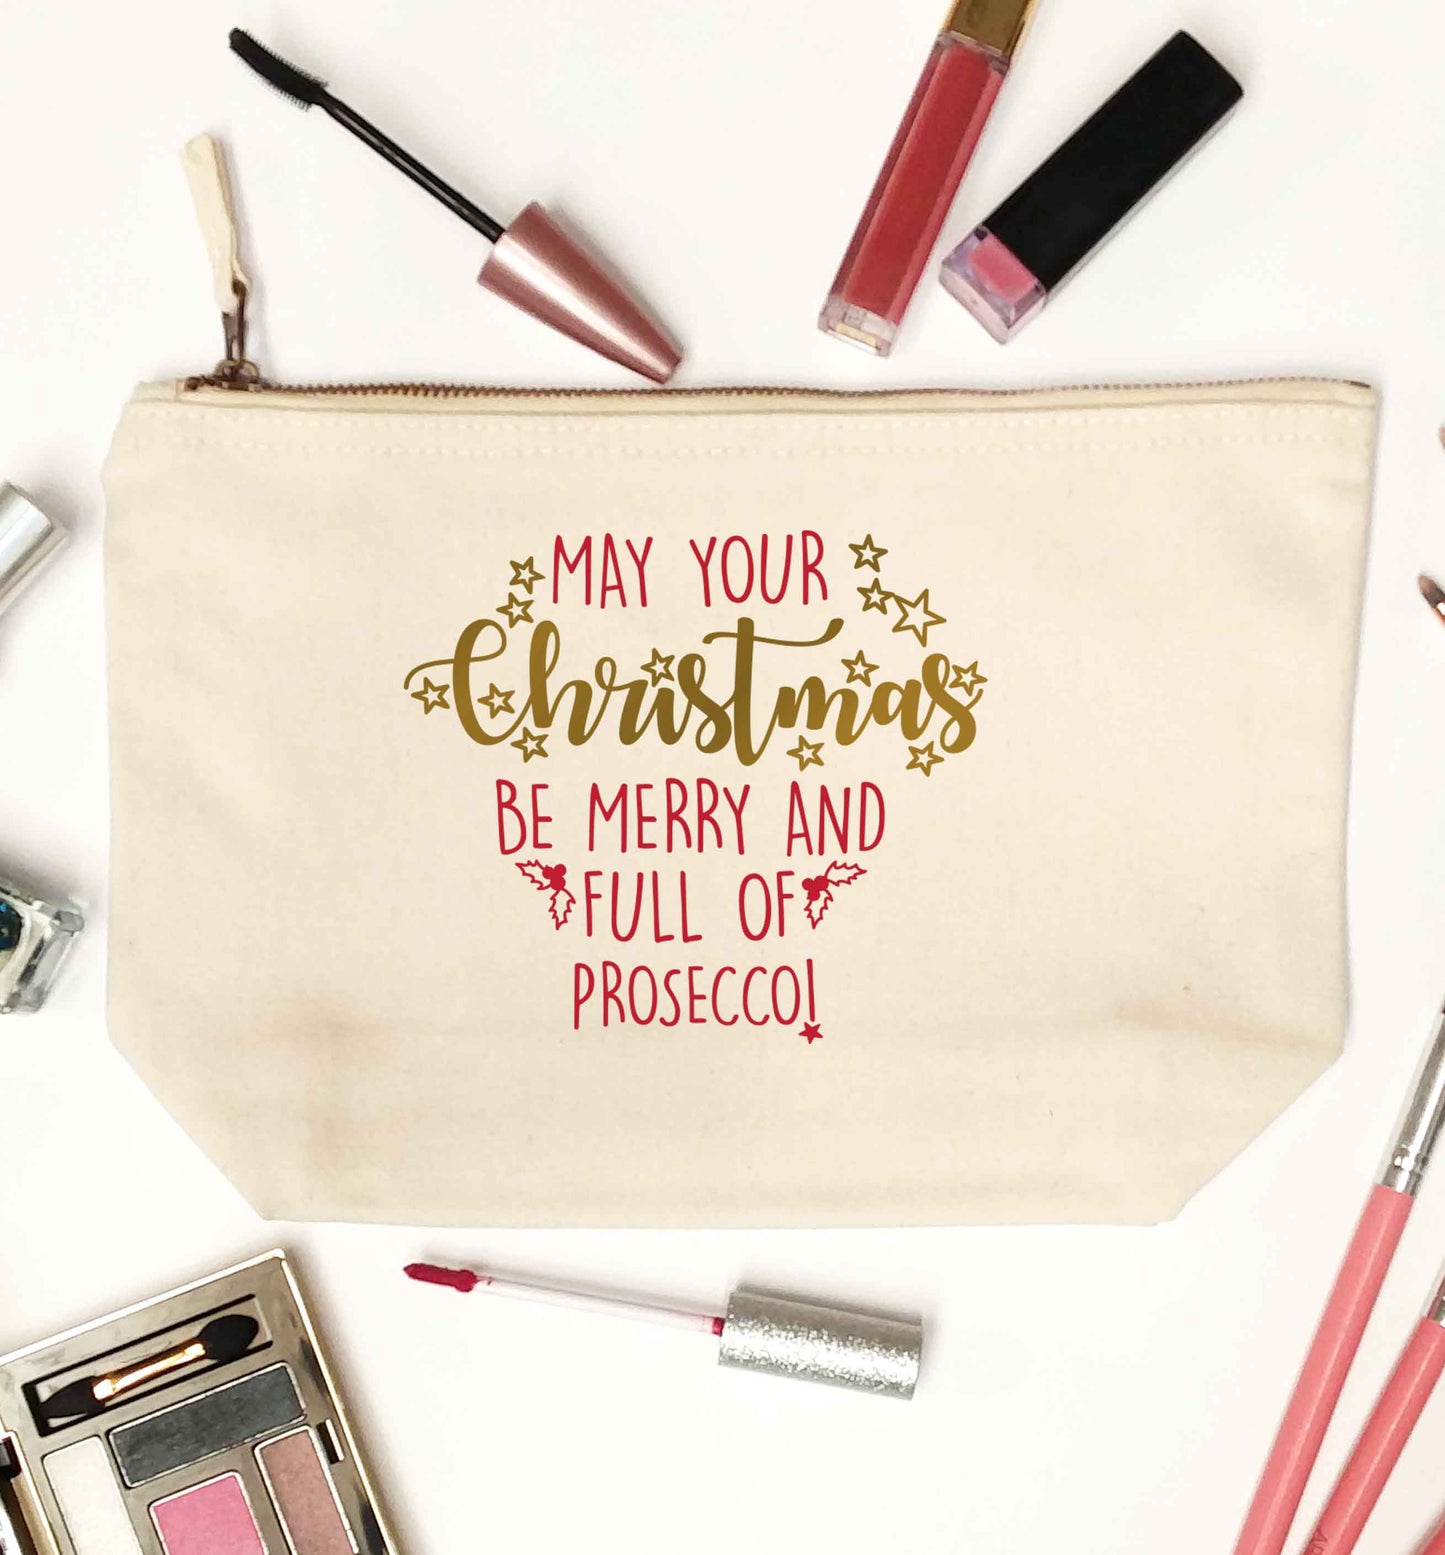 May your Christmas be merry and full of prosecco natural makeup bag